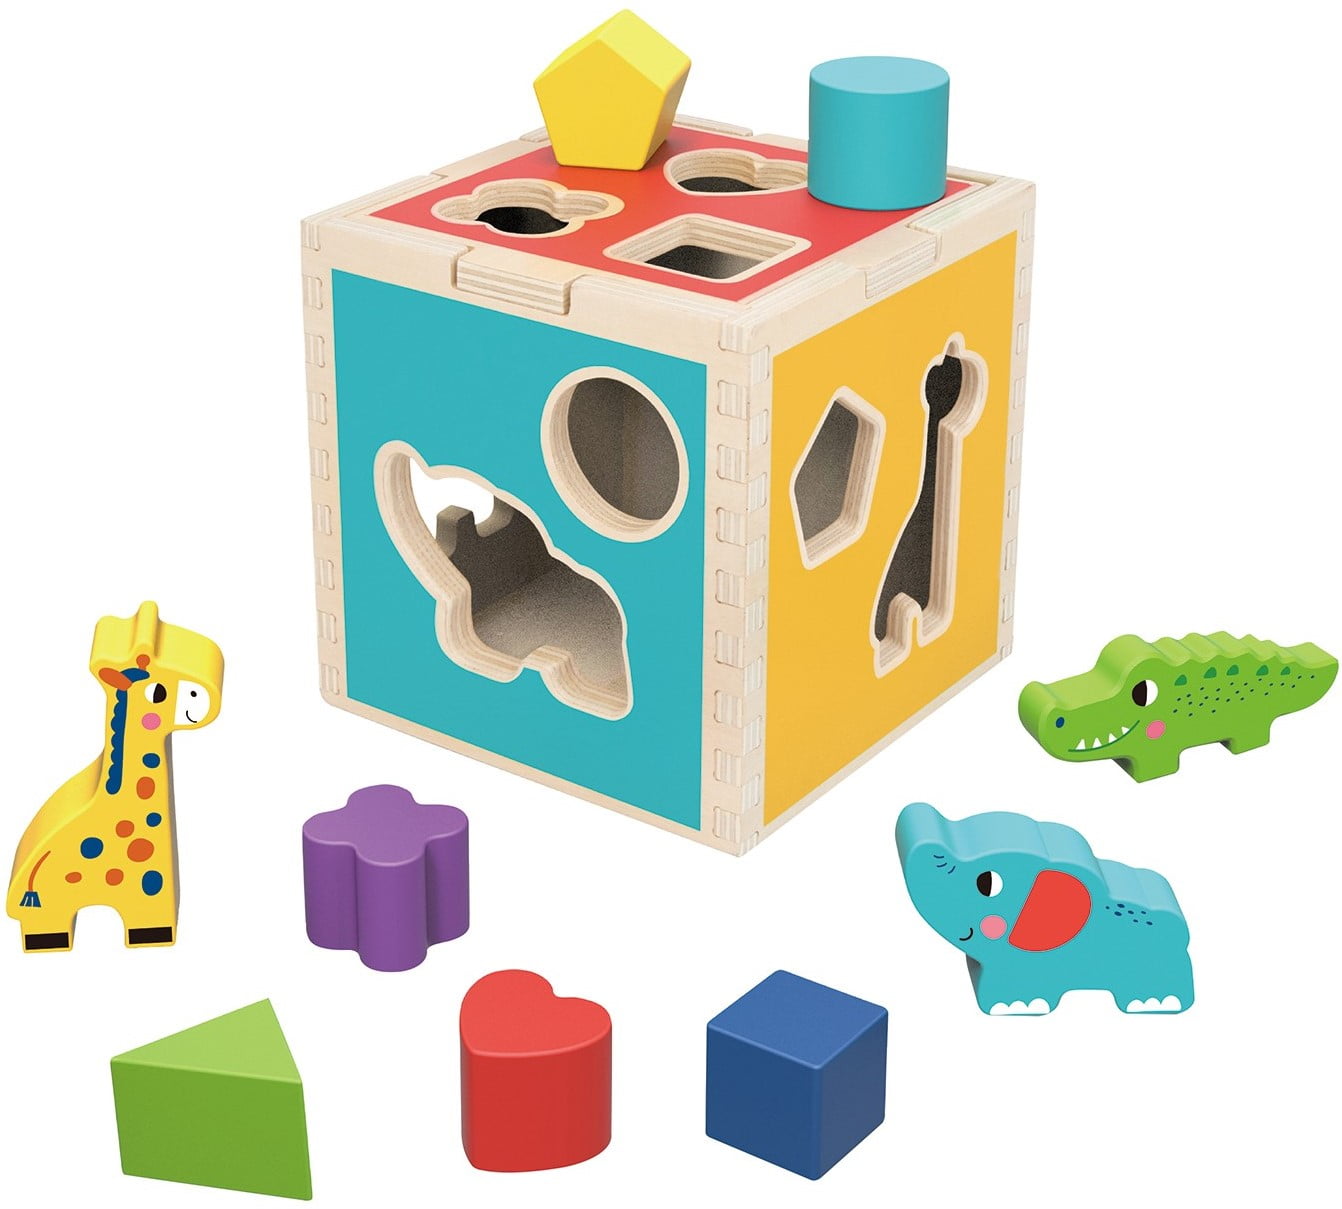 TOOKYLAND Wooden Shape Sorting Cube - Sorter Box Educational Toy, Ages 12m+